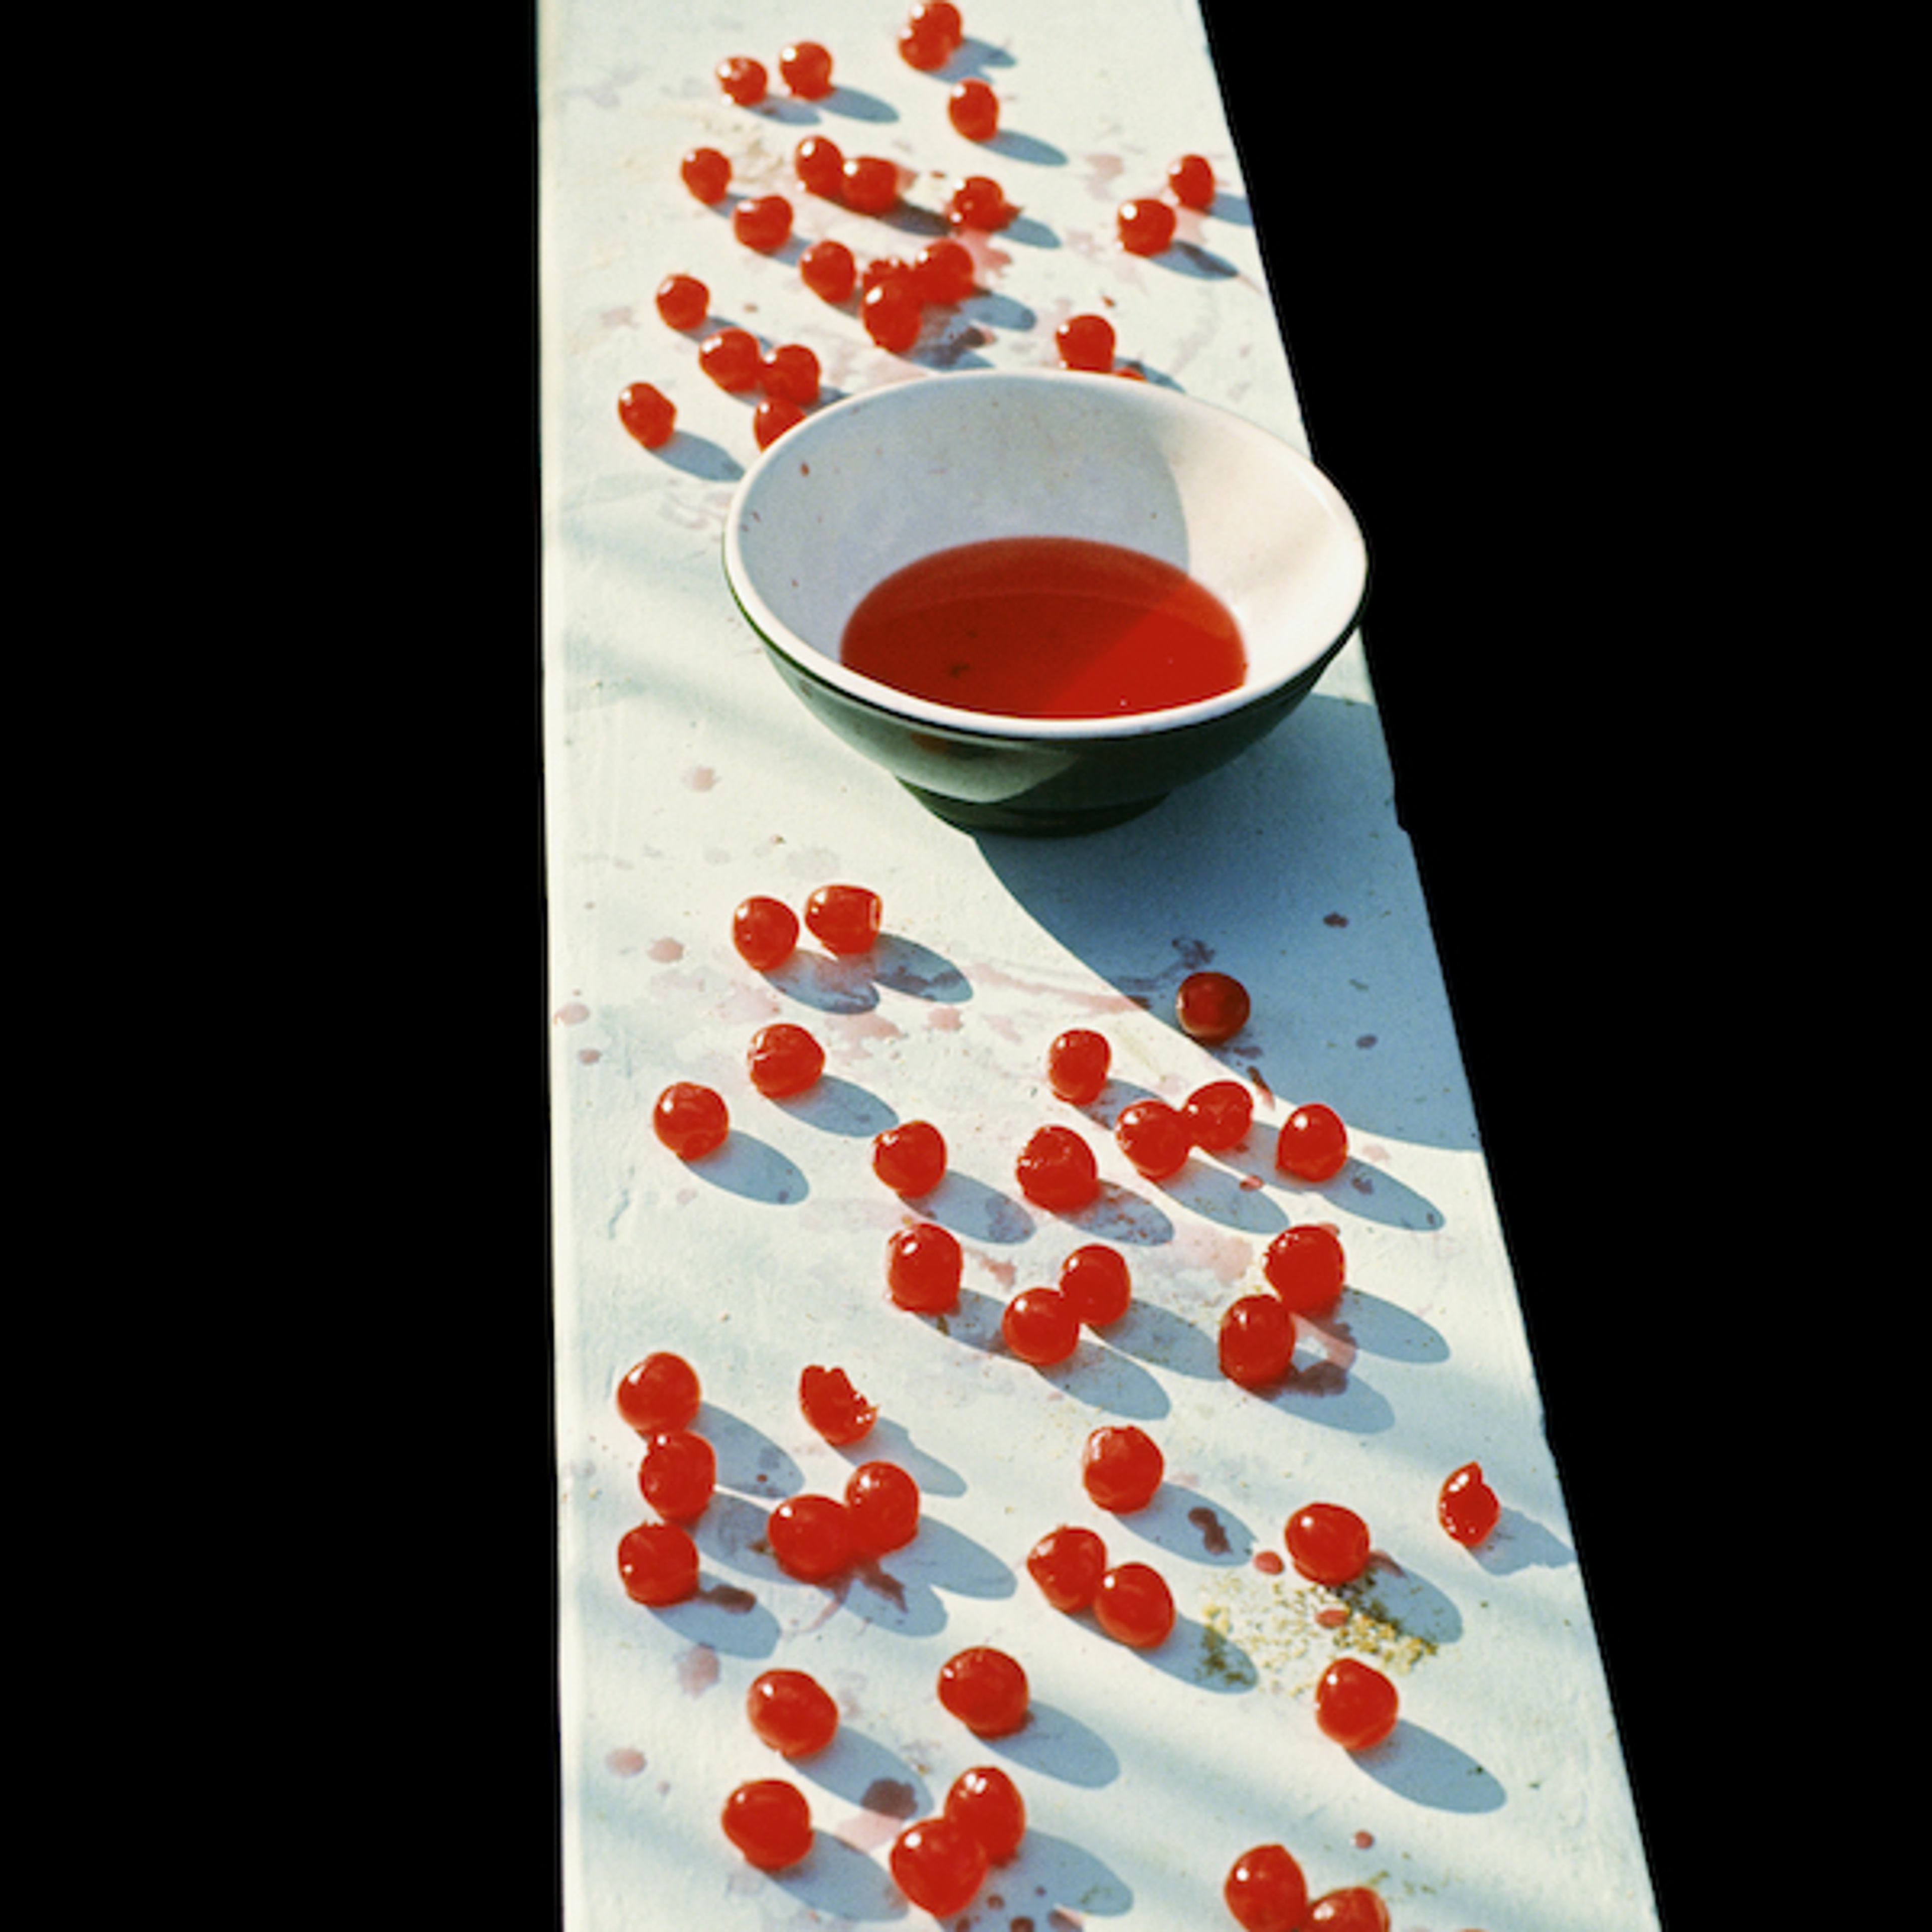 'McCartney' front cover featuring bowl of cherries photographed by Linda McCartney